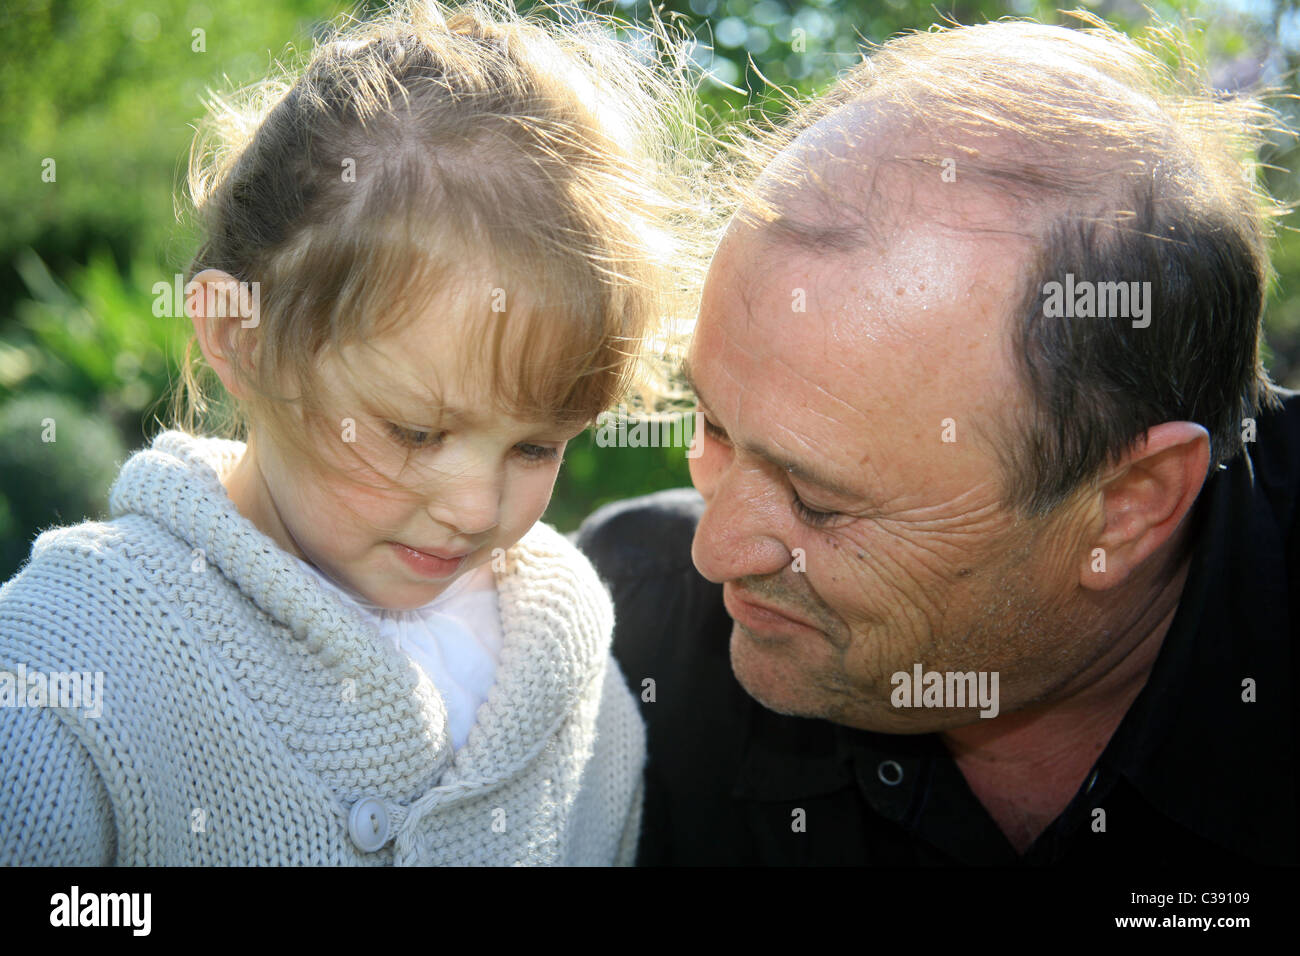 3 yr old girl with her grandfather Stock Photo